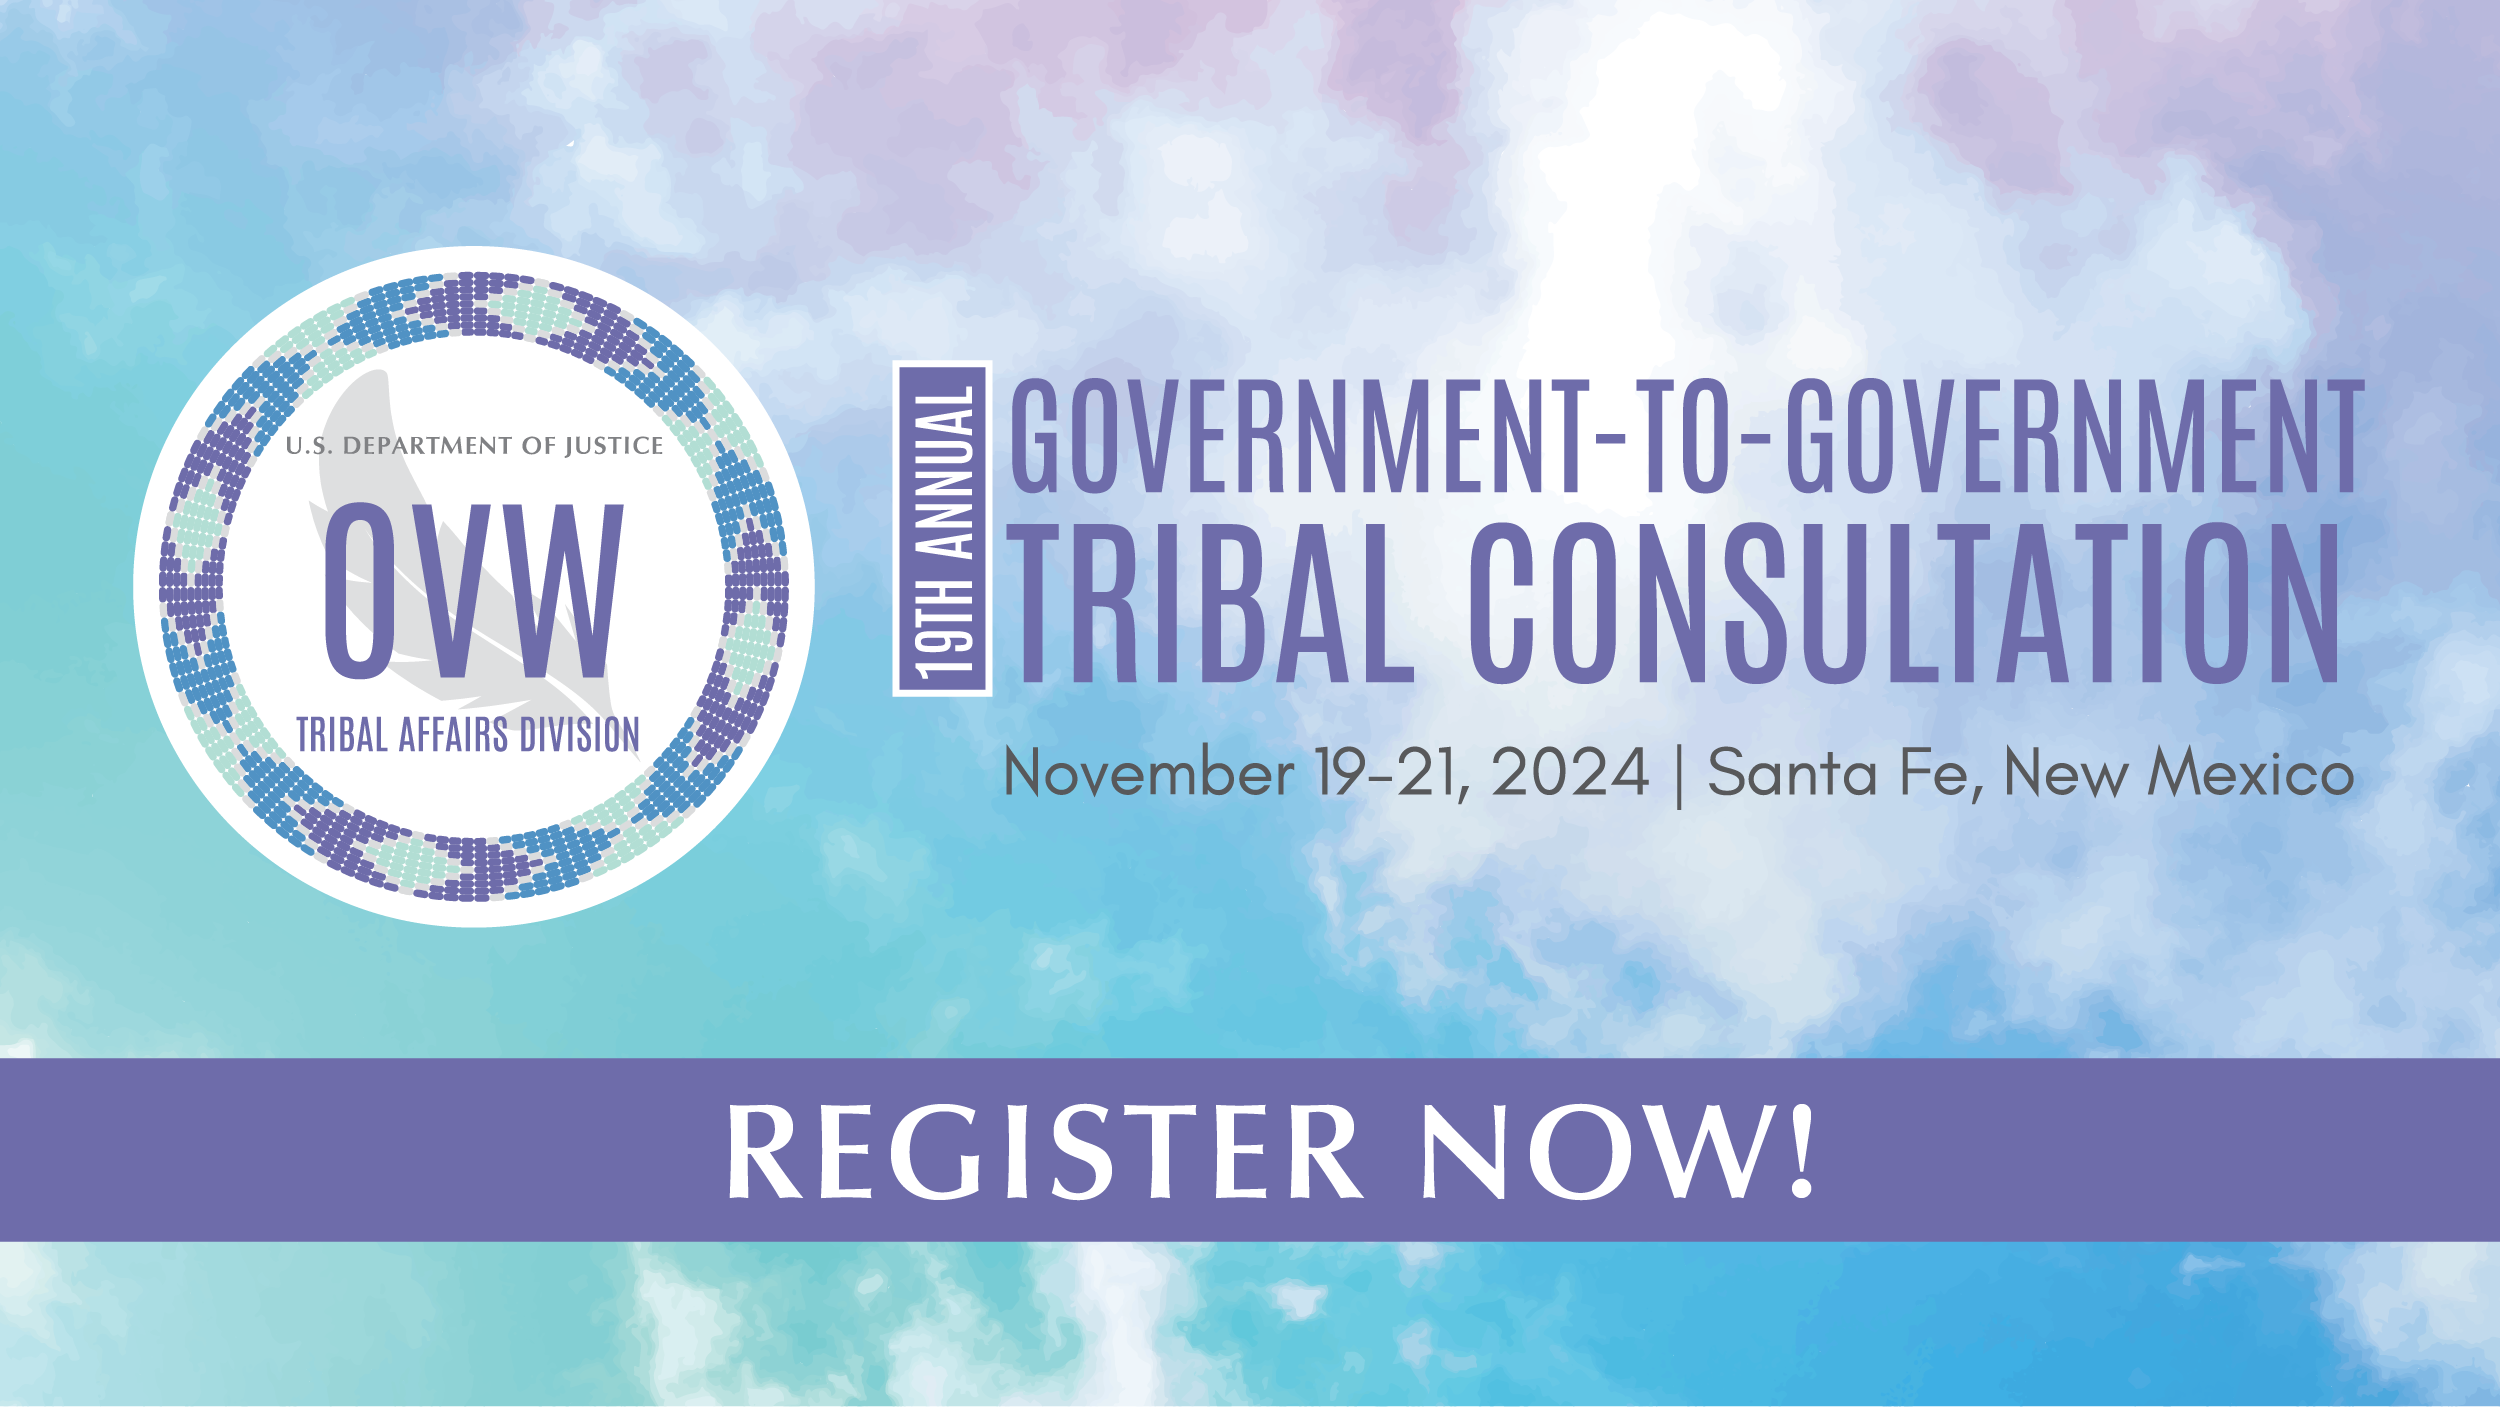 Graphic: OVW 19th Annual Government-to-Government Tribal Consultation, November 19-21, 2024 Santa Fe, New Mexico. Register now!